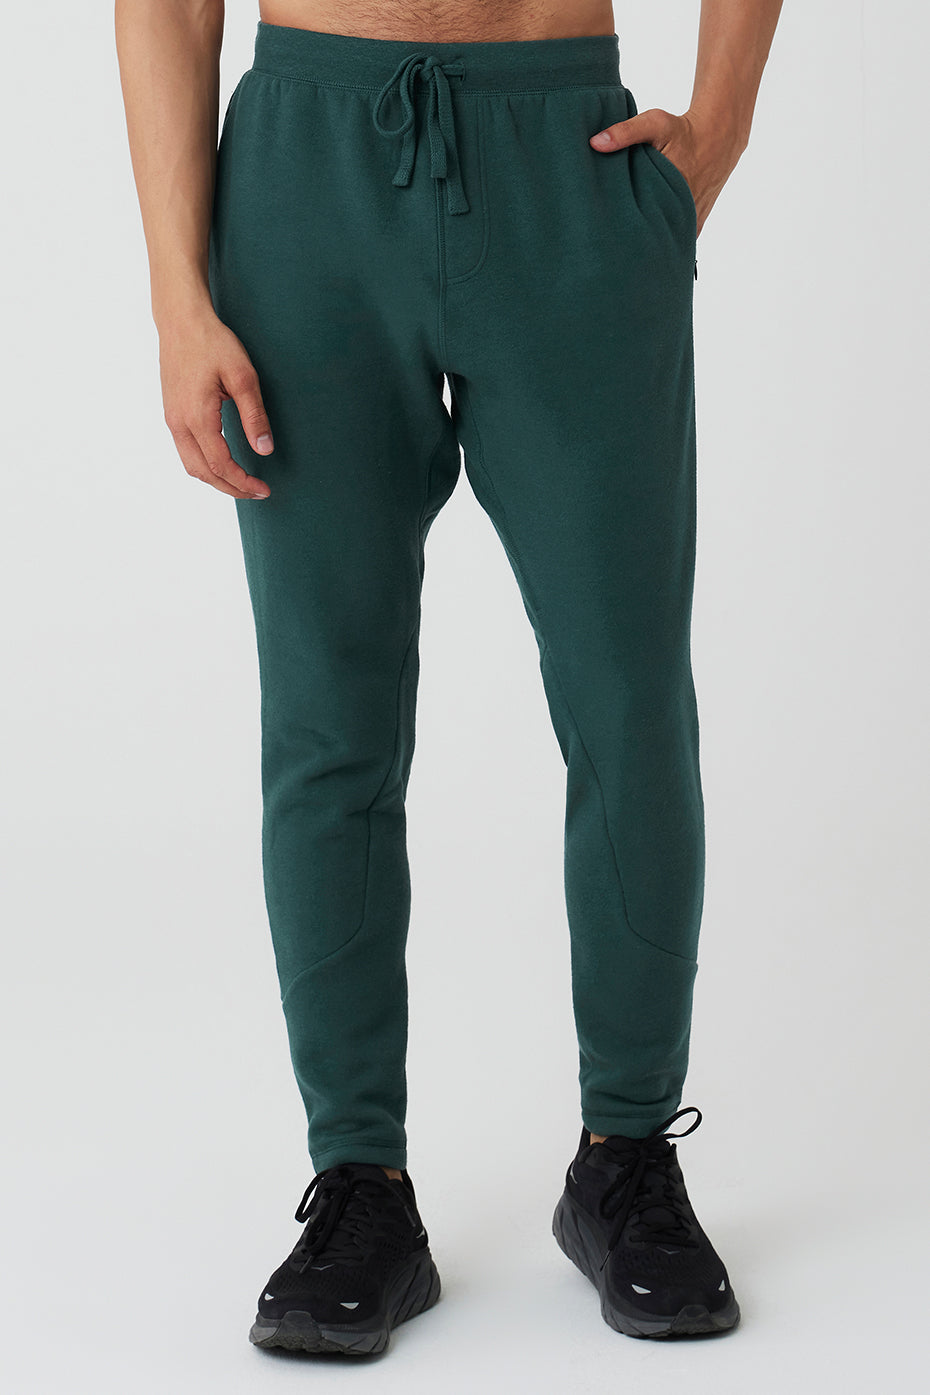 Alo Yoga®  Road Trip Trouser in Midnight Green, Size: Small - Yahoo  Shopping